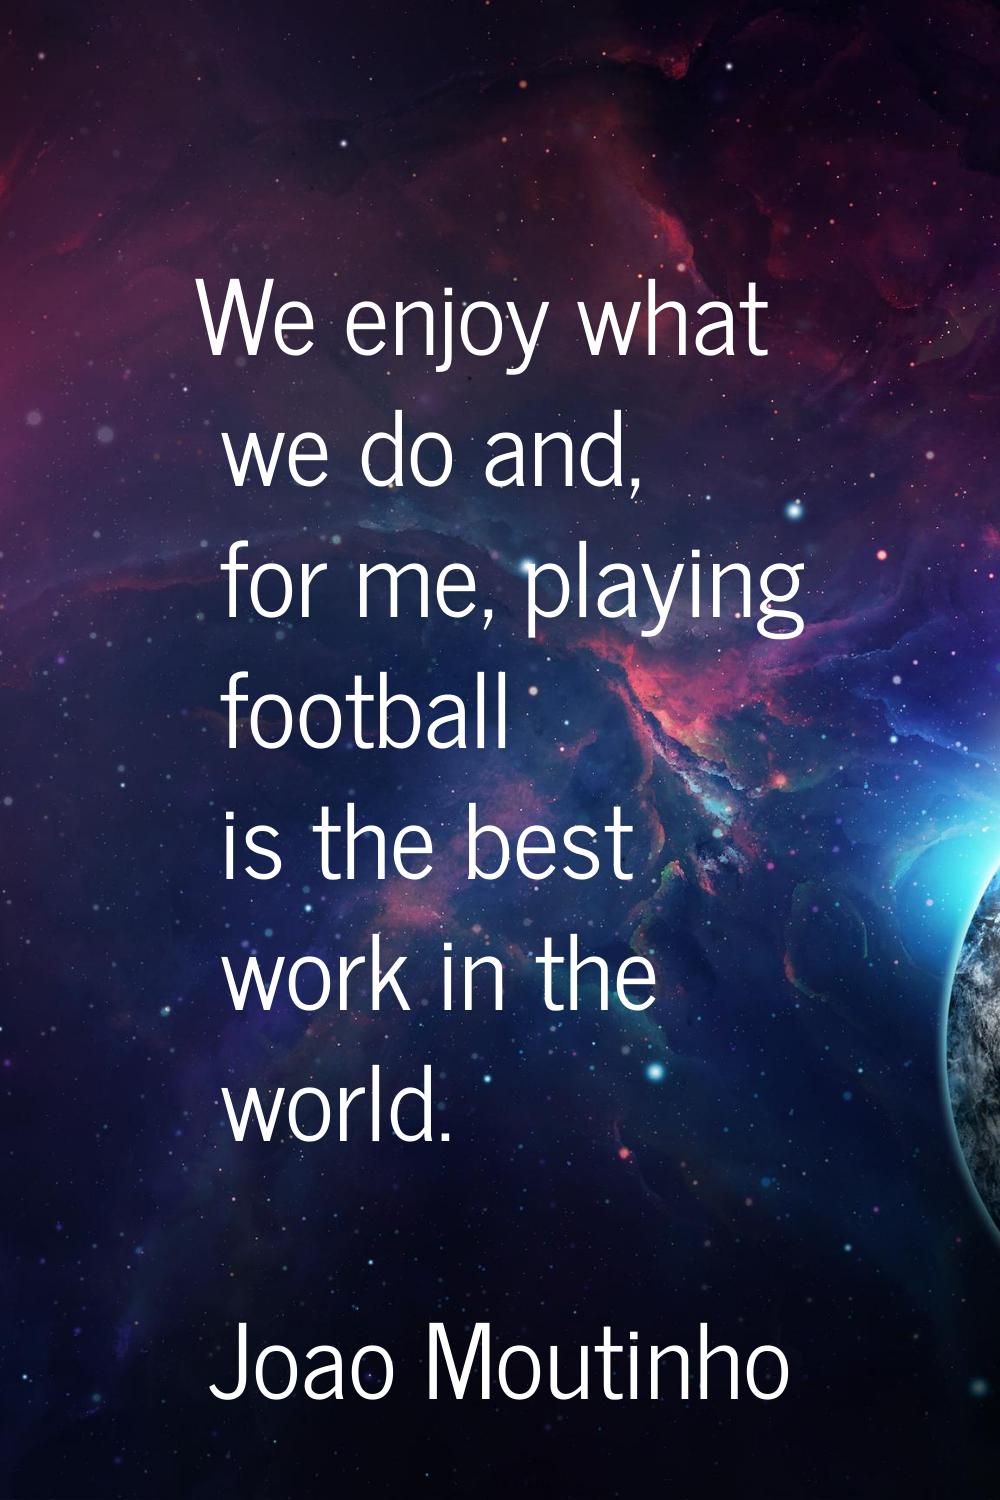 We enjoy what we do and, for me, playing football is the best work in the world.